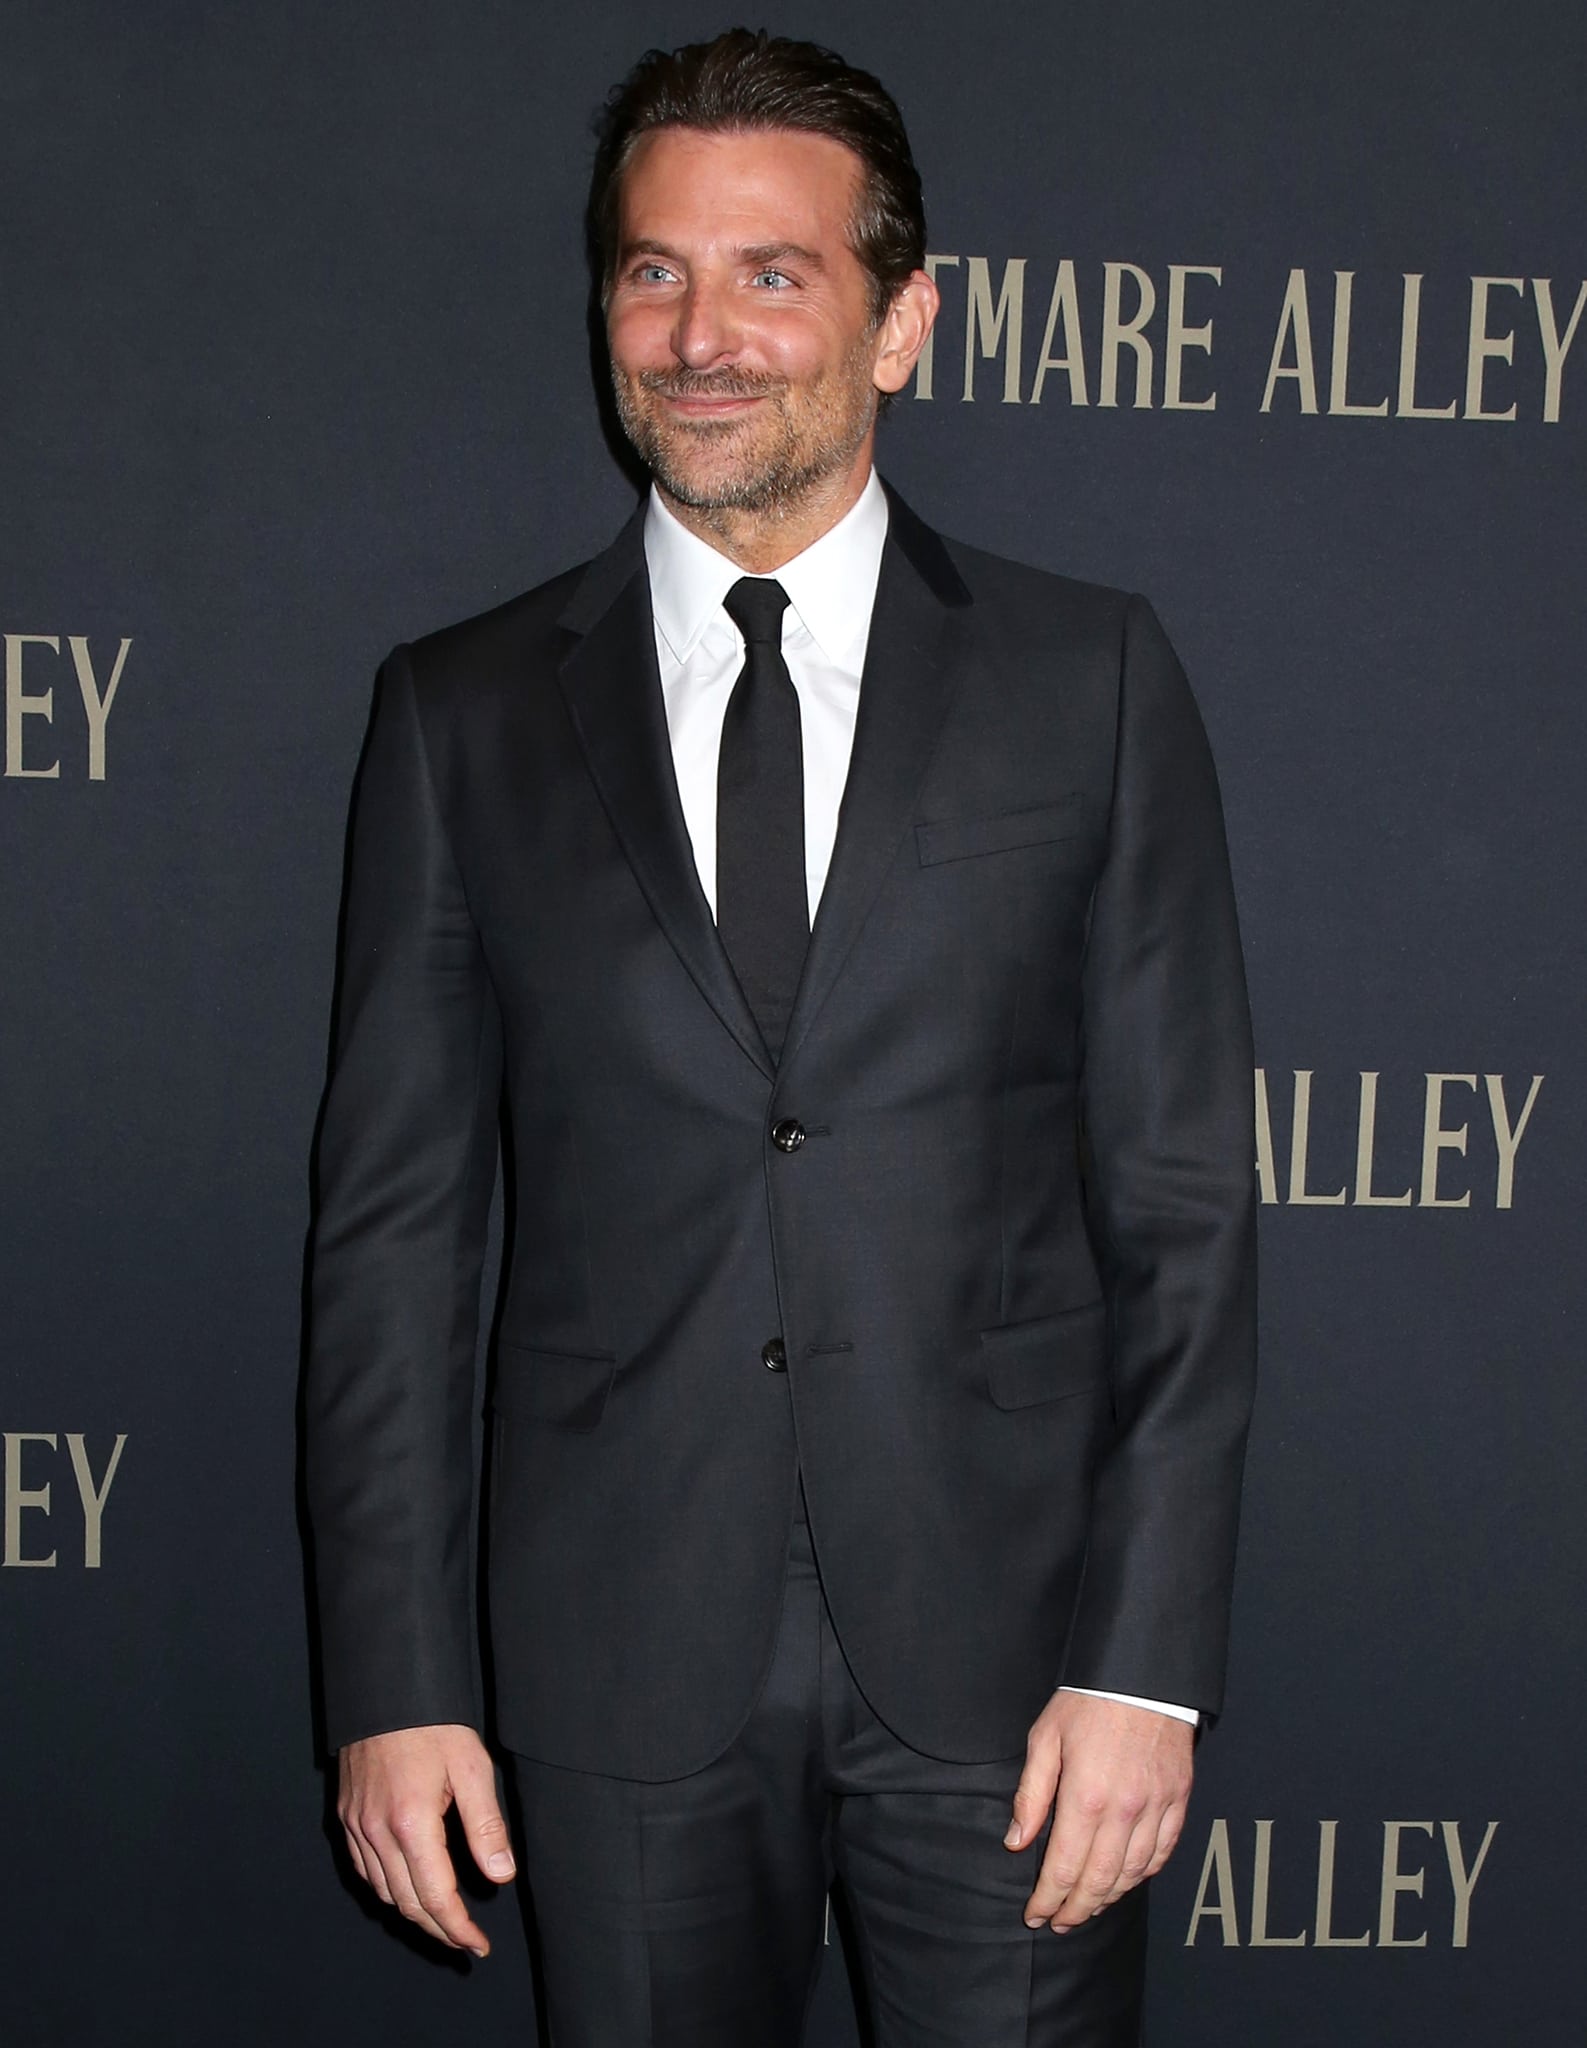 Bradley Cooper thinks having Irina Shayk at the premiere of her latest project is "very special"